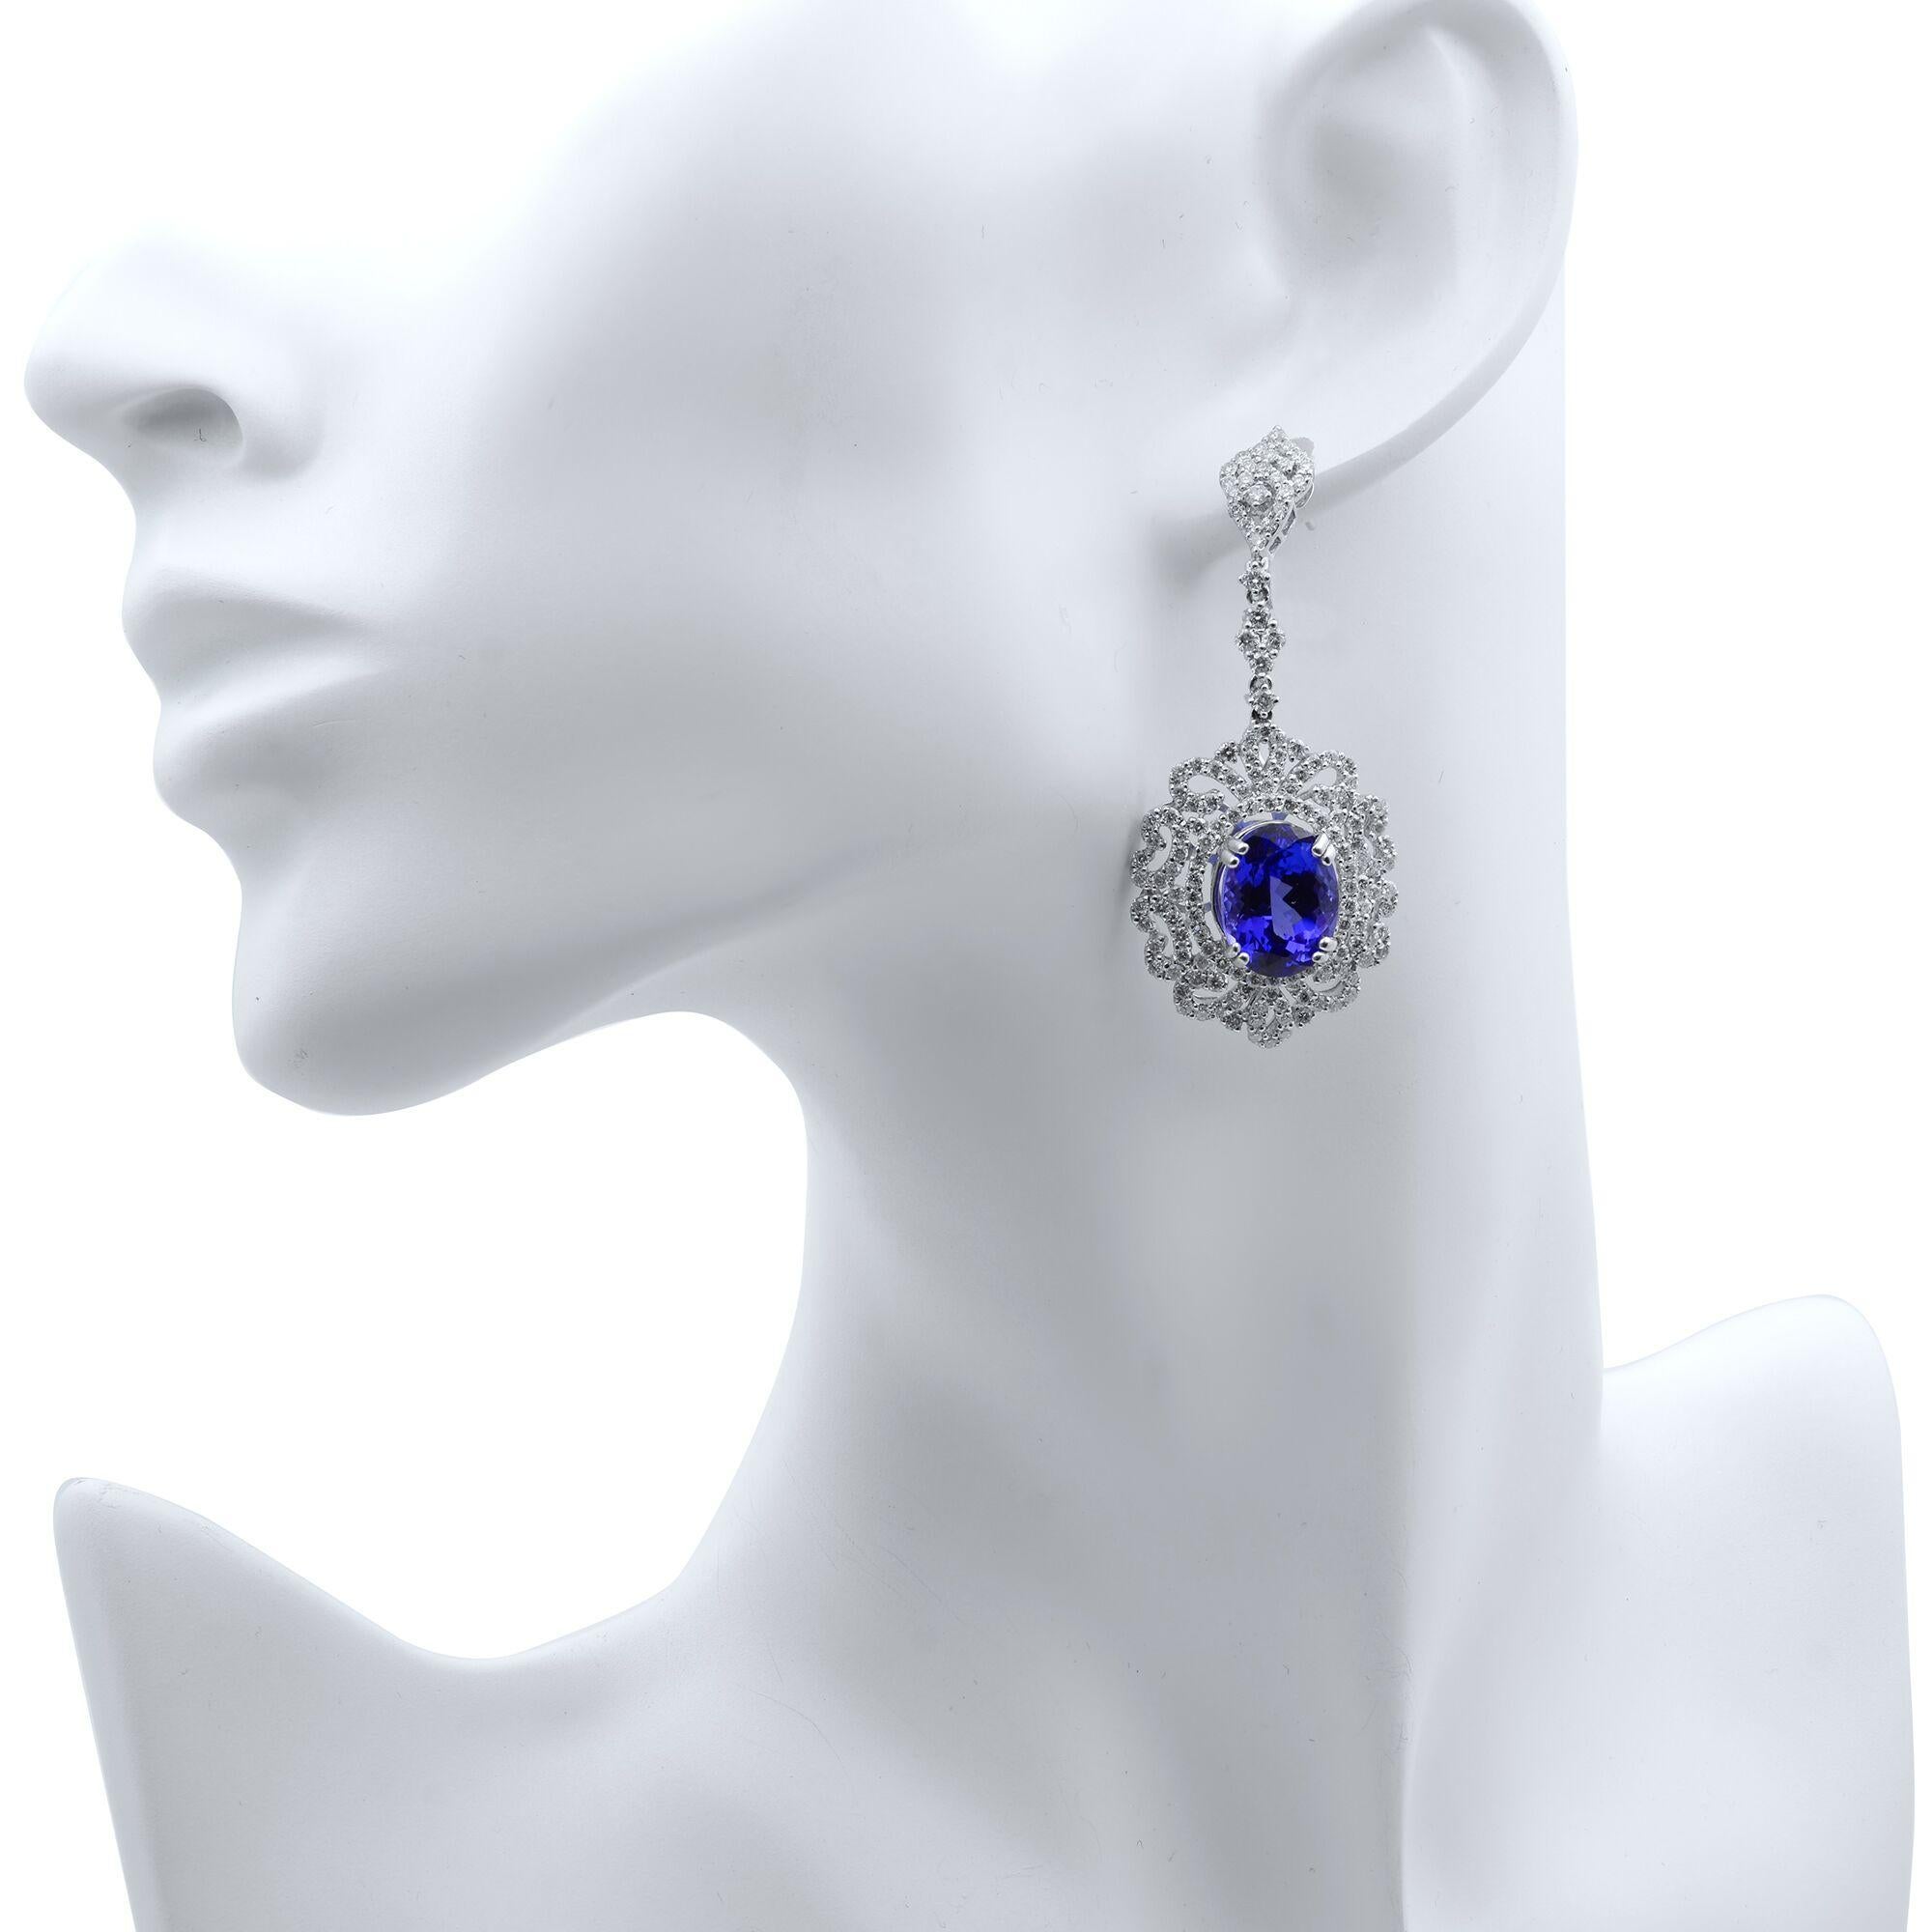 Tanzanite Diamond Chandelier Drop Earrings 18 Karat White Gold In New Condition For Sale In New York, NY